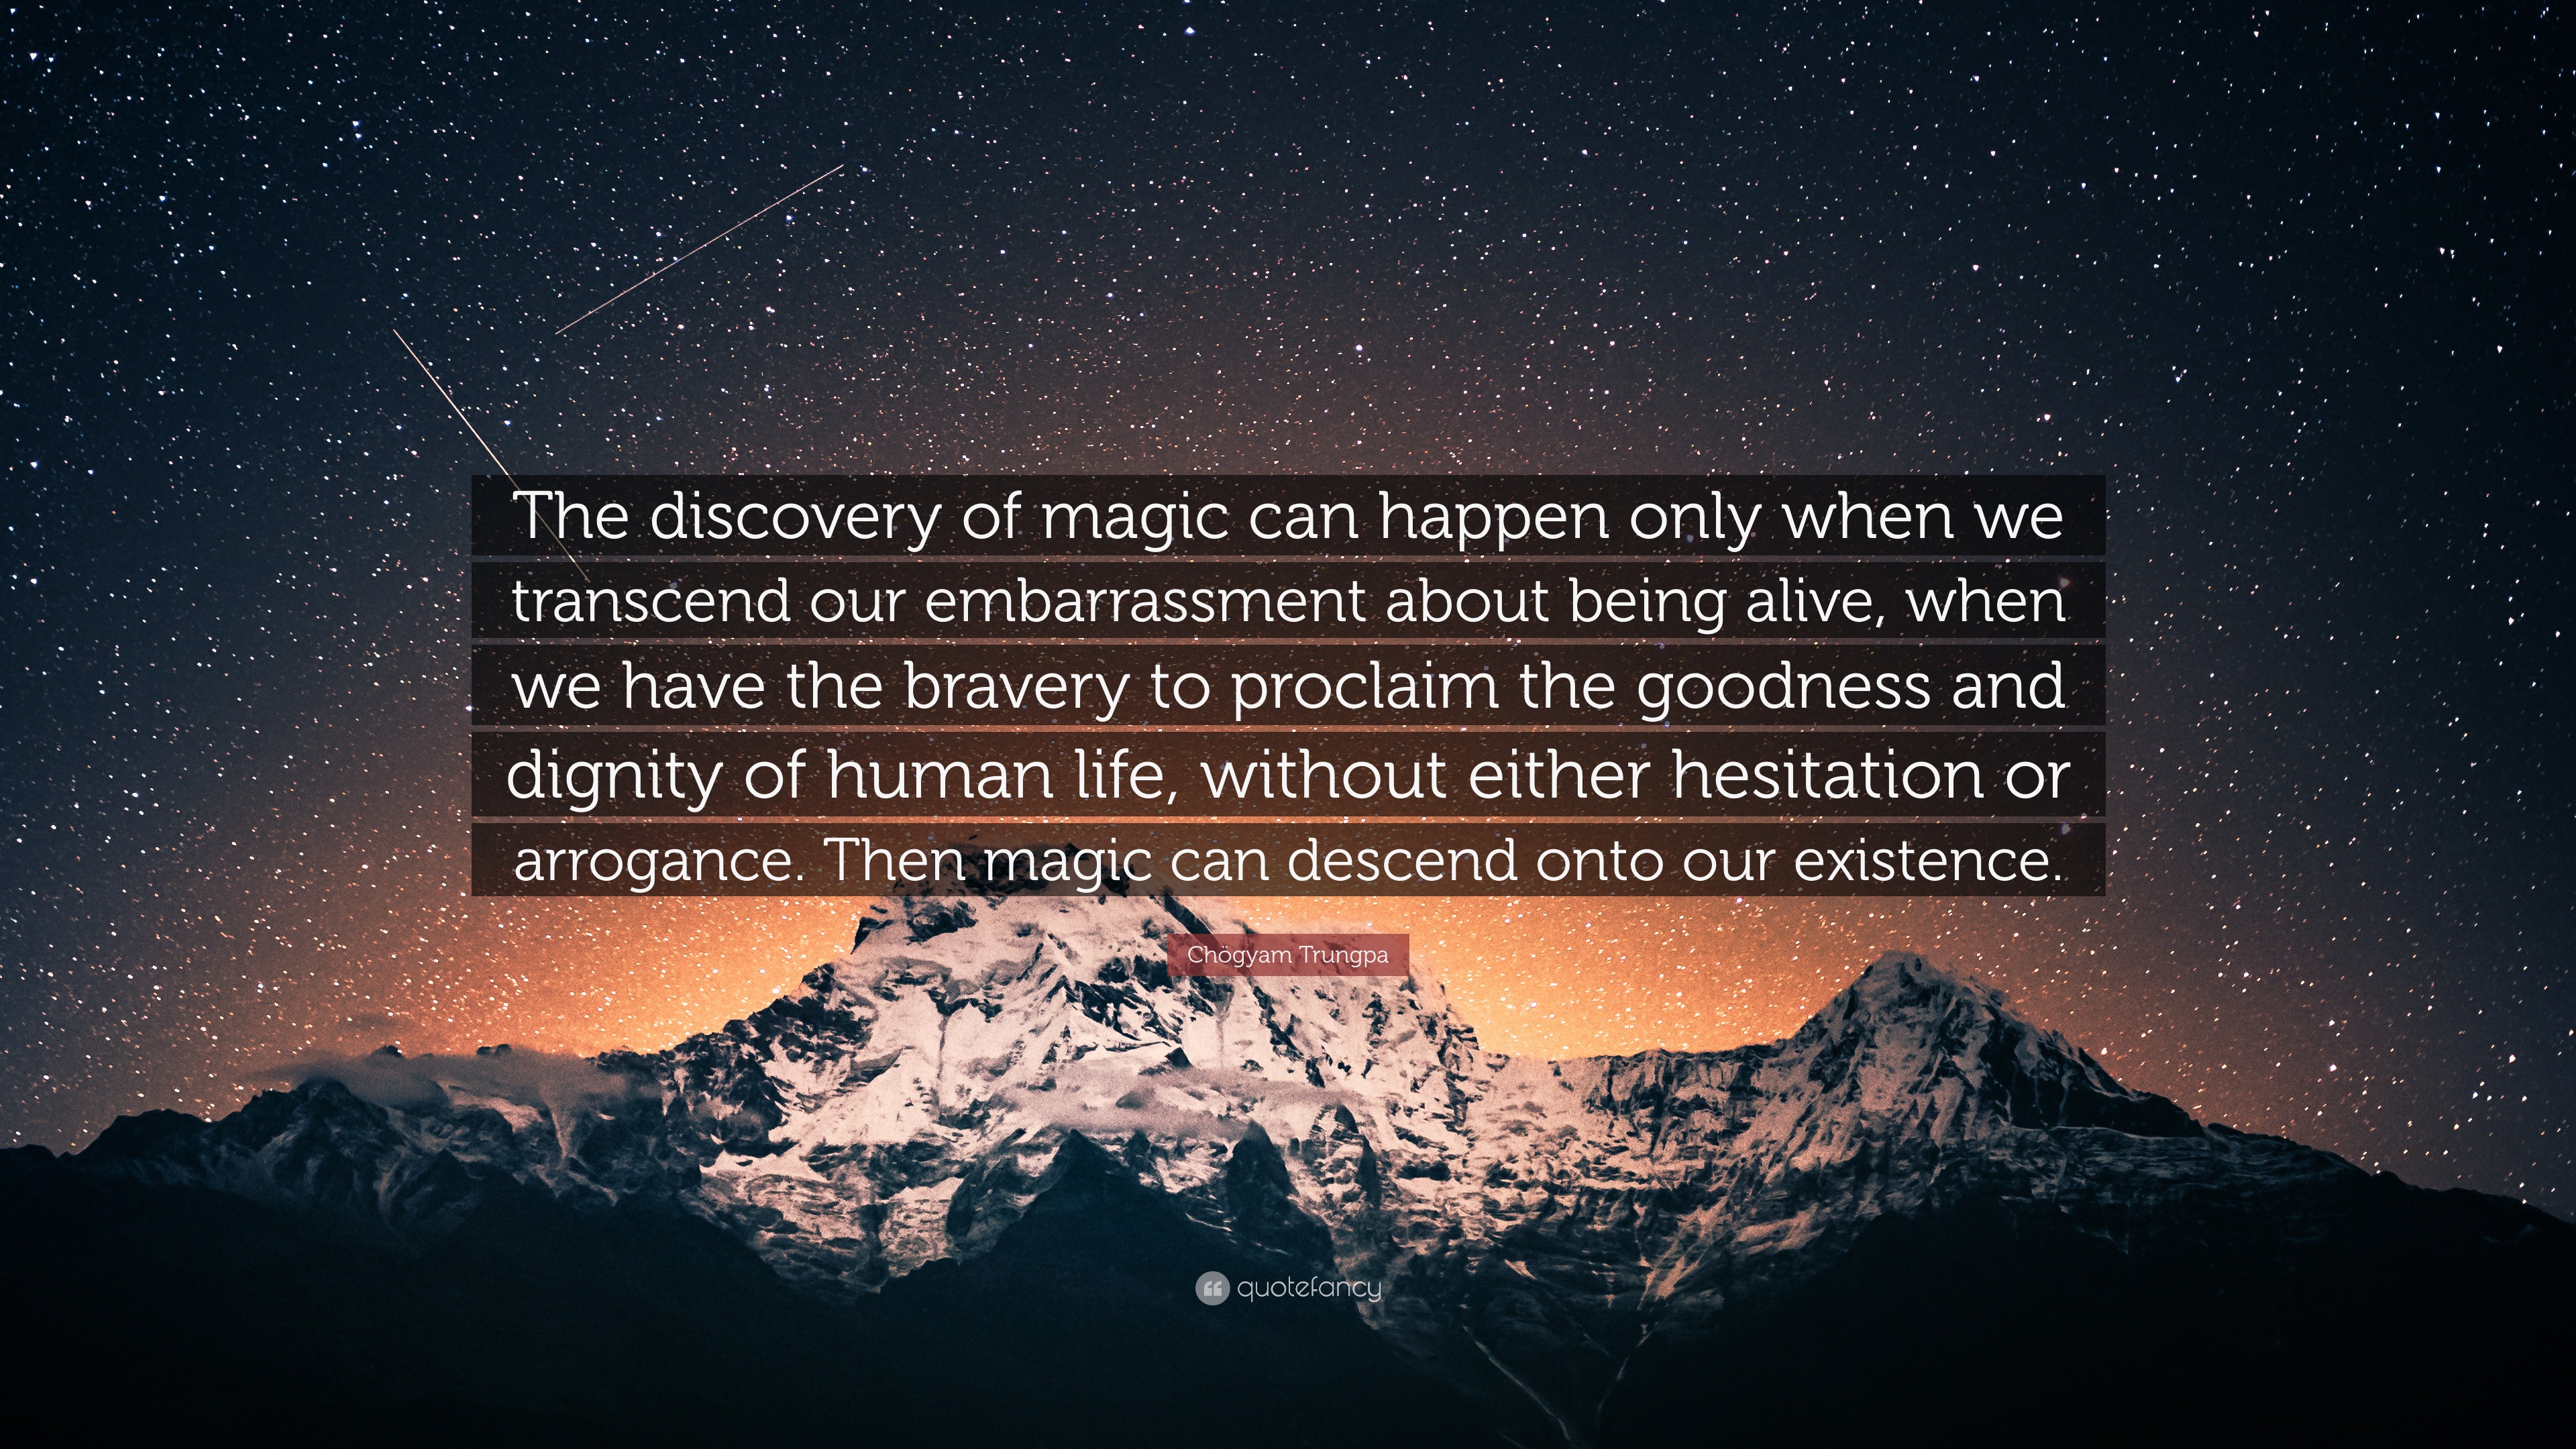 Chögyam Trungpa Quote “The discovery of magic can happen only when we transcend our